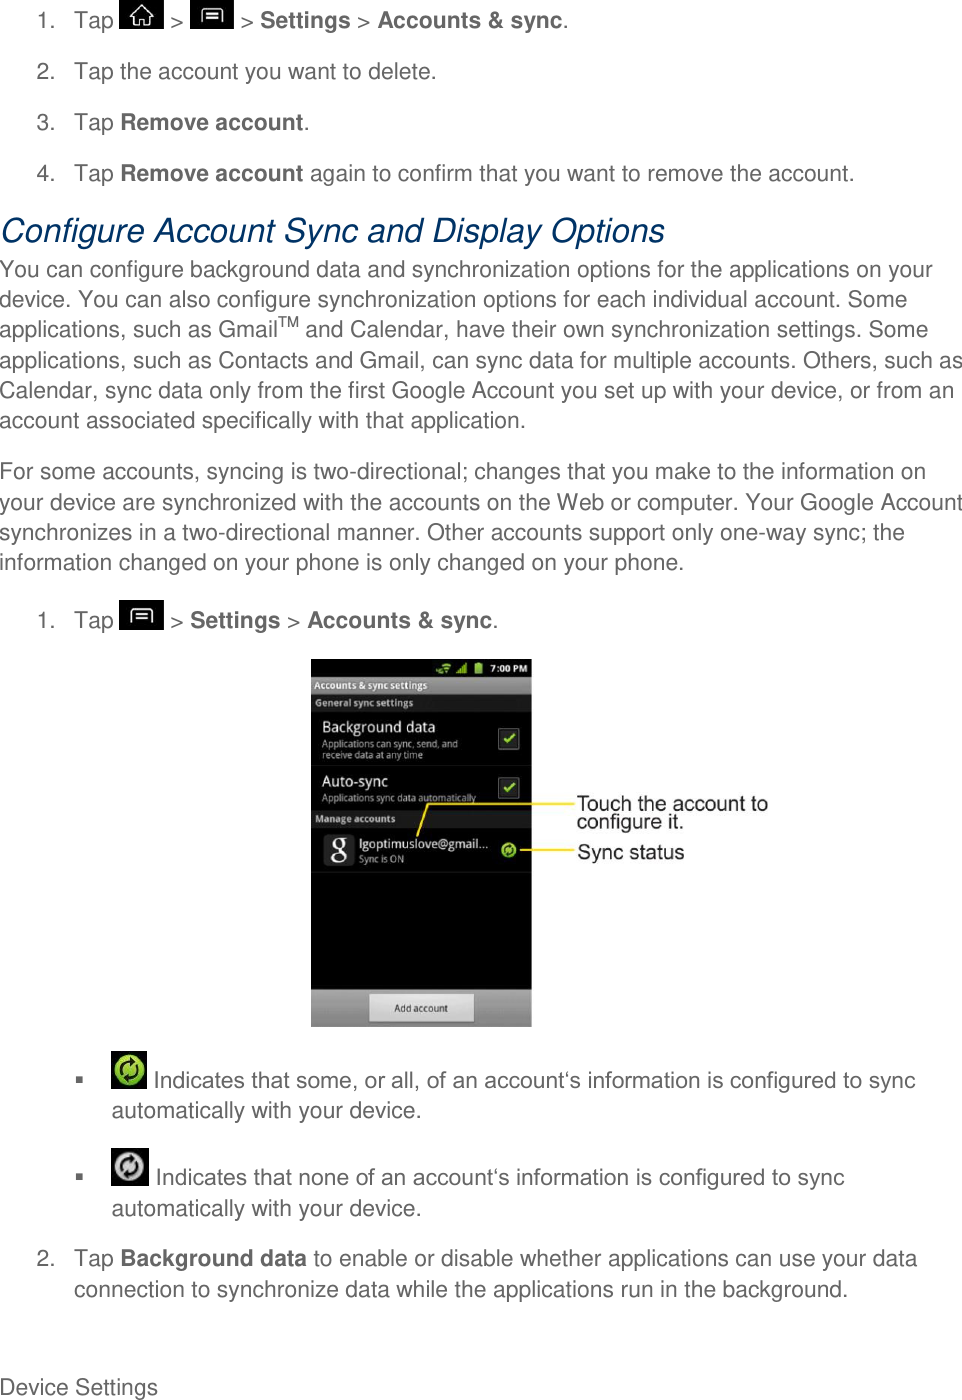 Device Settings     1.  Tap   &gt;   &gt; Settings &gt; Accounts &amp; sync. 2.  Tap the account you want to delete. 3.  Tap Remove account. 4.  Tap Remove account again to confirm that you want to remove the account. Configure Account Sync and Display Options You can configure background data and synchronization options for the applications on your device. You can also configure synchronization options for each individual account. Some applications, such as GmailTM and Calendar, have their own synchronization settings. Some applications, such as Contacts and Gmail, can sync data for multiple accounts. Others, such as Calendar, sync data only from the first Google Account you set up with your device, or from an account associated specifically with that application. For some accounts, syncing is two-directional; changes that you make to the information on your device are synchronized with the accounts on the Web or computer. Your Google Account synchronizes in a two-directional manner. Other accounts support only one-way sync; the information changed on your phone is only changed on your phone. 1.  Tap   &gt; Settings &gt; Accounts &amp; sync.     Indautomatically with your device.    automatically with your device. 2.  Tap Background data to enable or disable whether applications can use your data connection to synchronize data while the applications run in the background. 